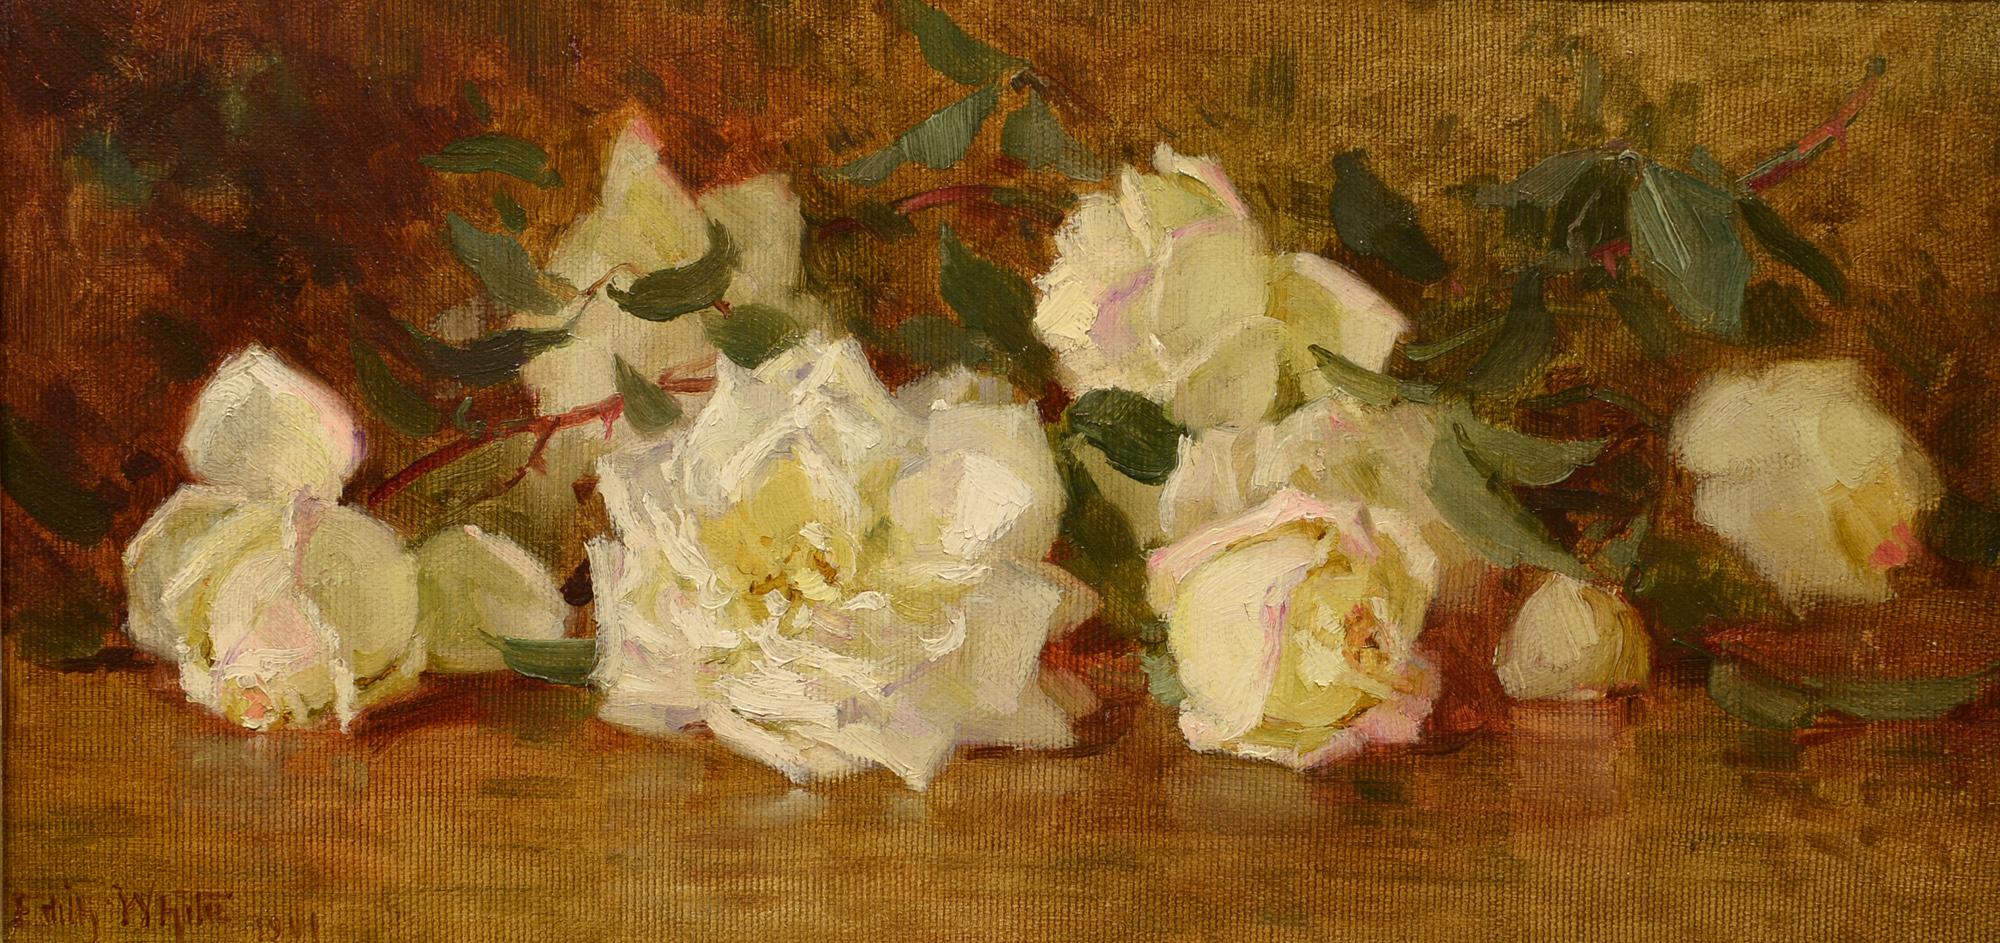 "White Roses" is an American impressionist still life painting by California artist, Edith White. Born in Decorah, Iowa in 1855, White was a member of Mills College's first graduating class in 1874. White then studied at the School of Design in San